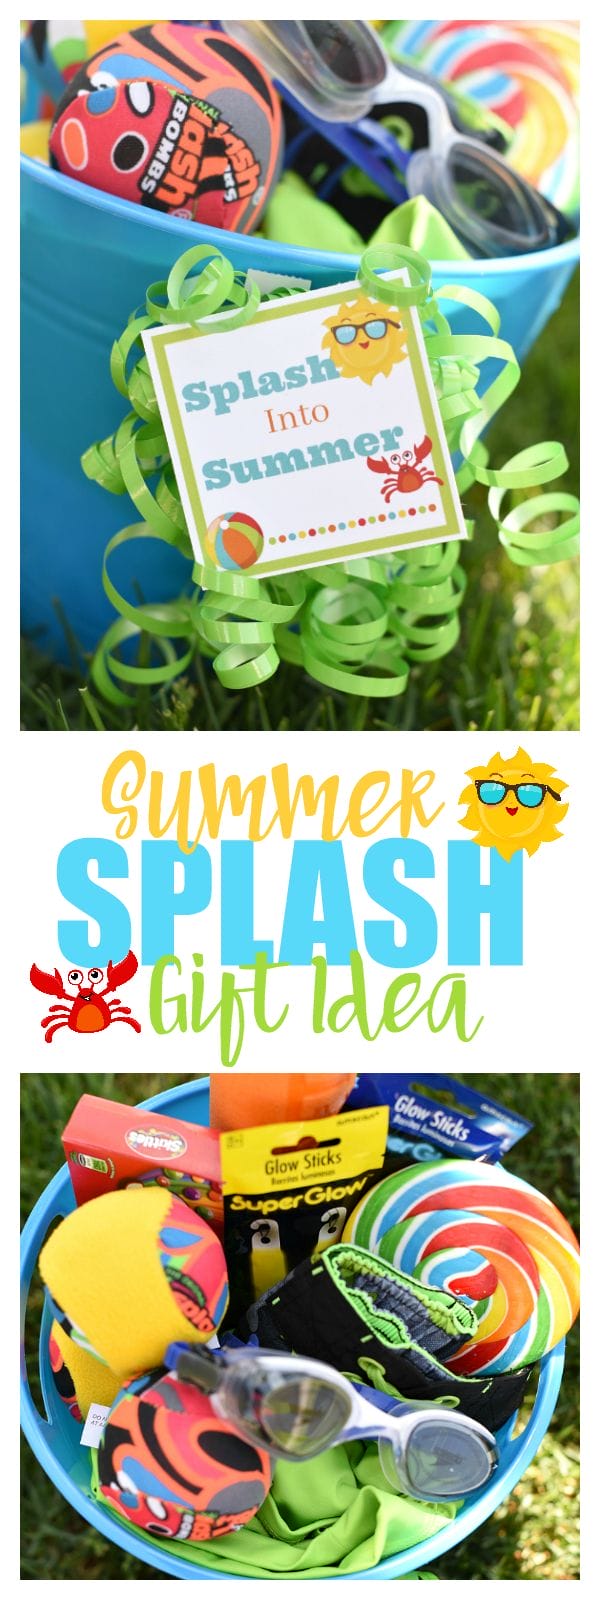 How fun is this Splash into Summer Gift Idea. Love this for the last day of school or a summer birthday gift.